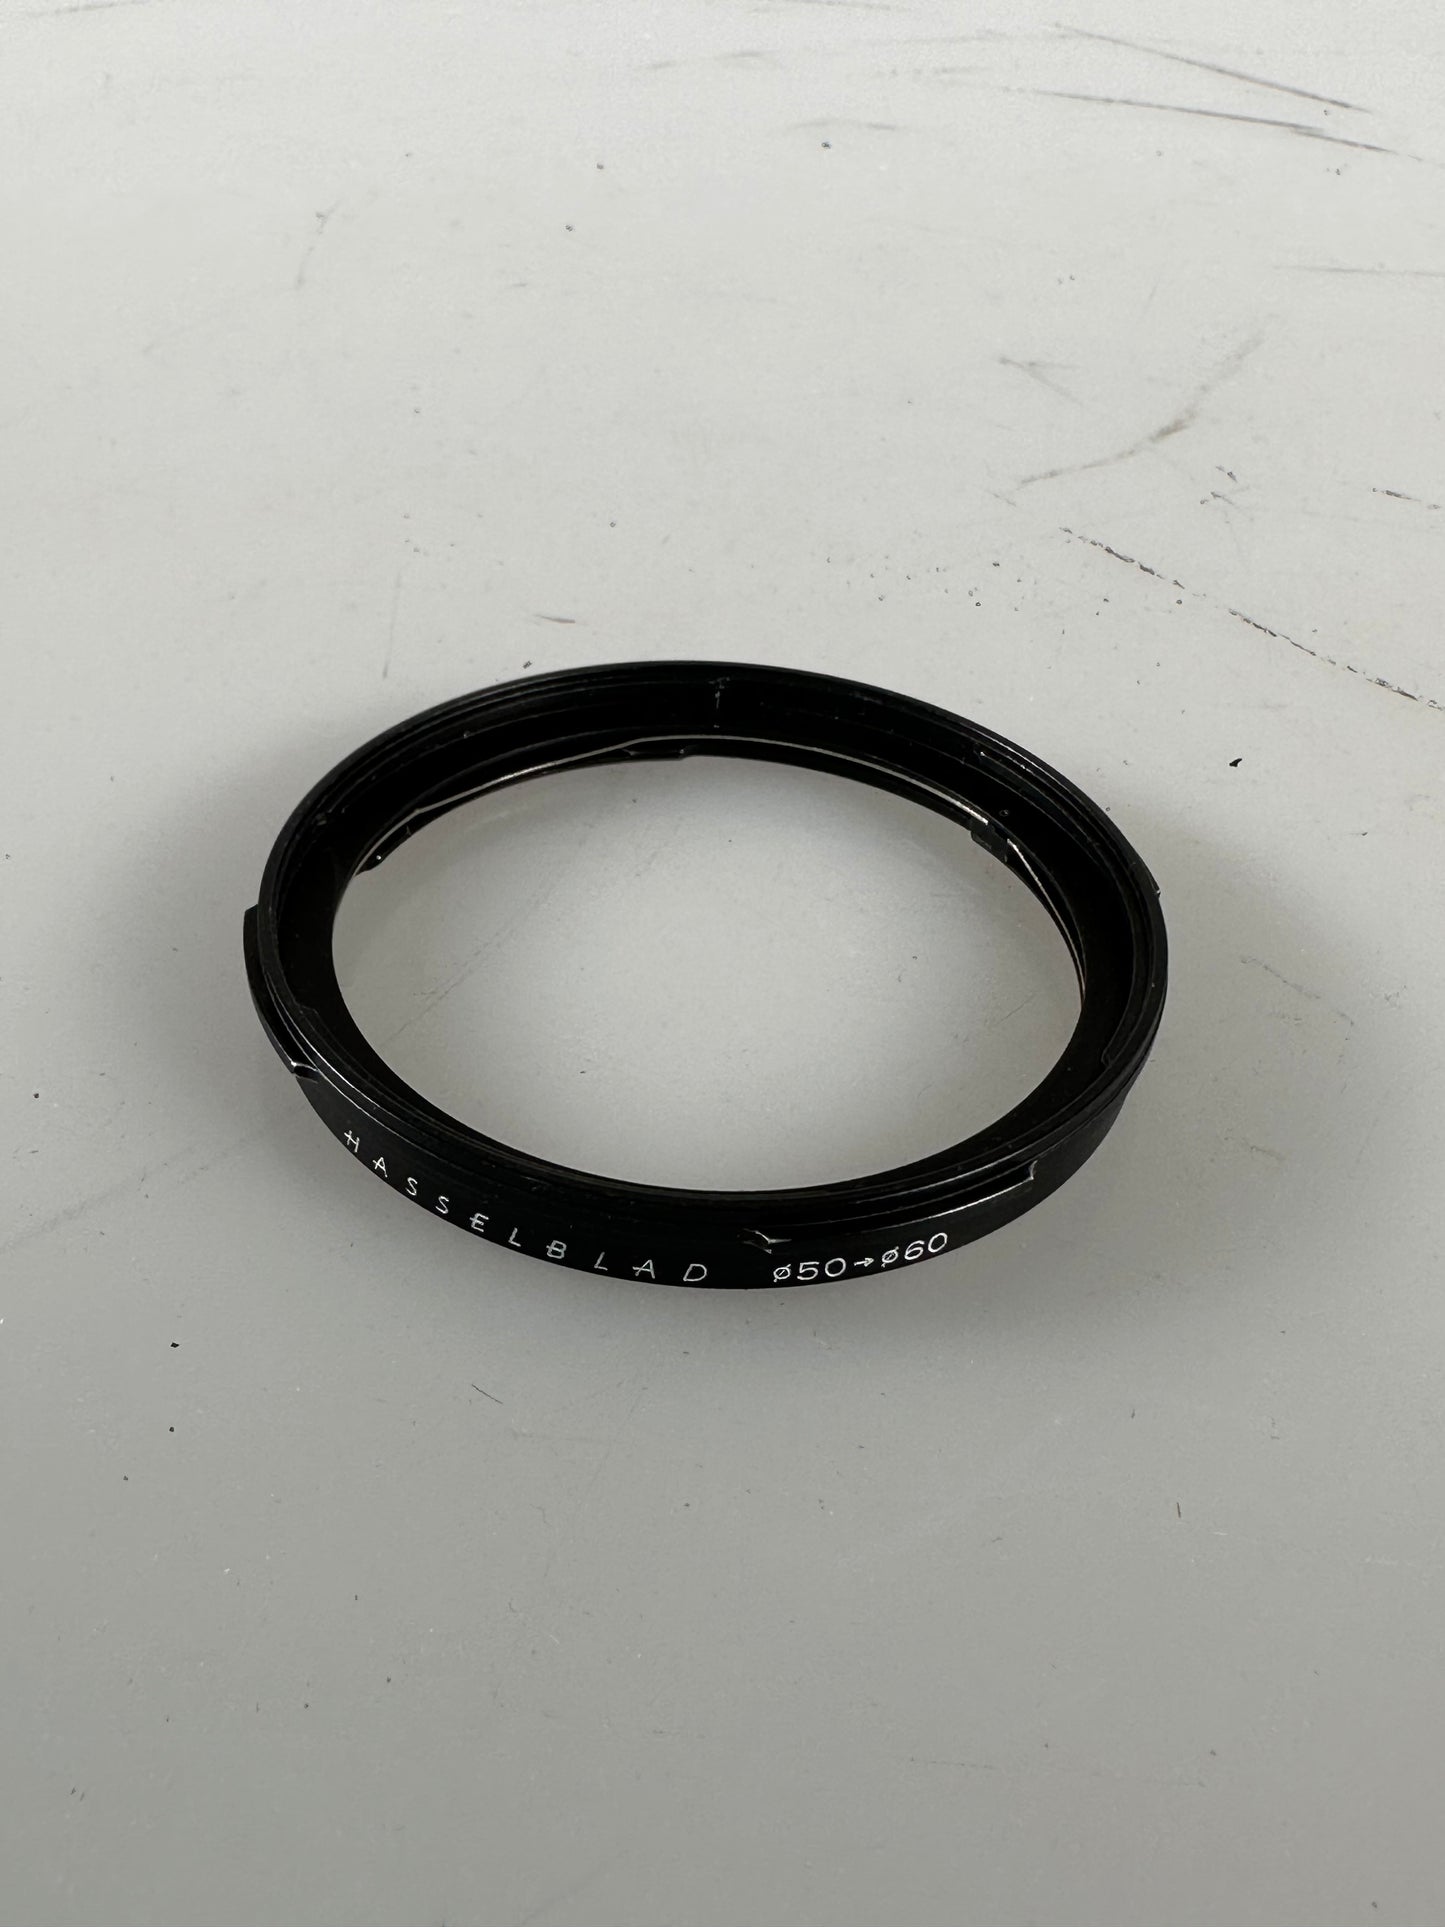 Hasselblad Bay 50 to 60 (B50 to B60) Step-Up Ring